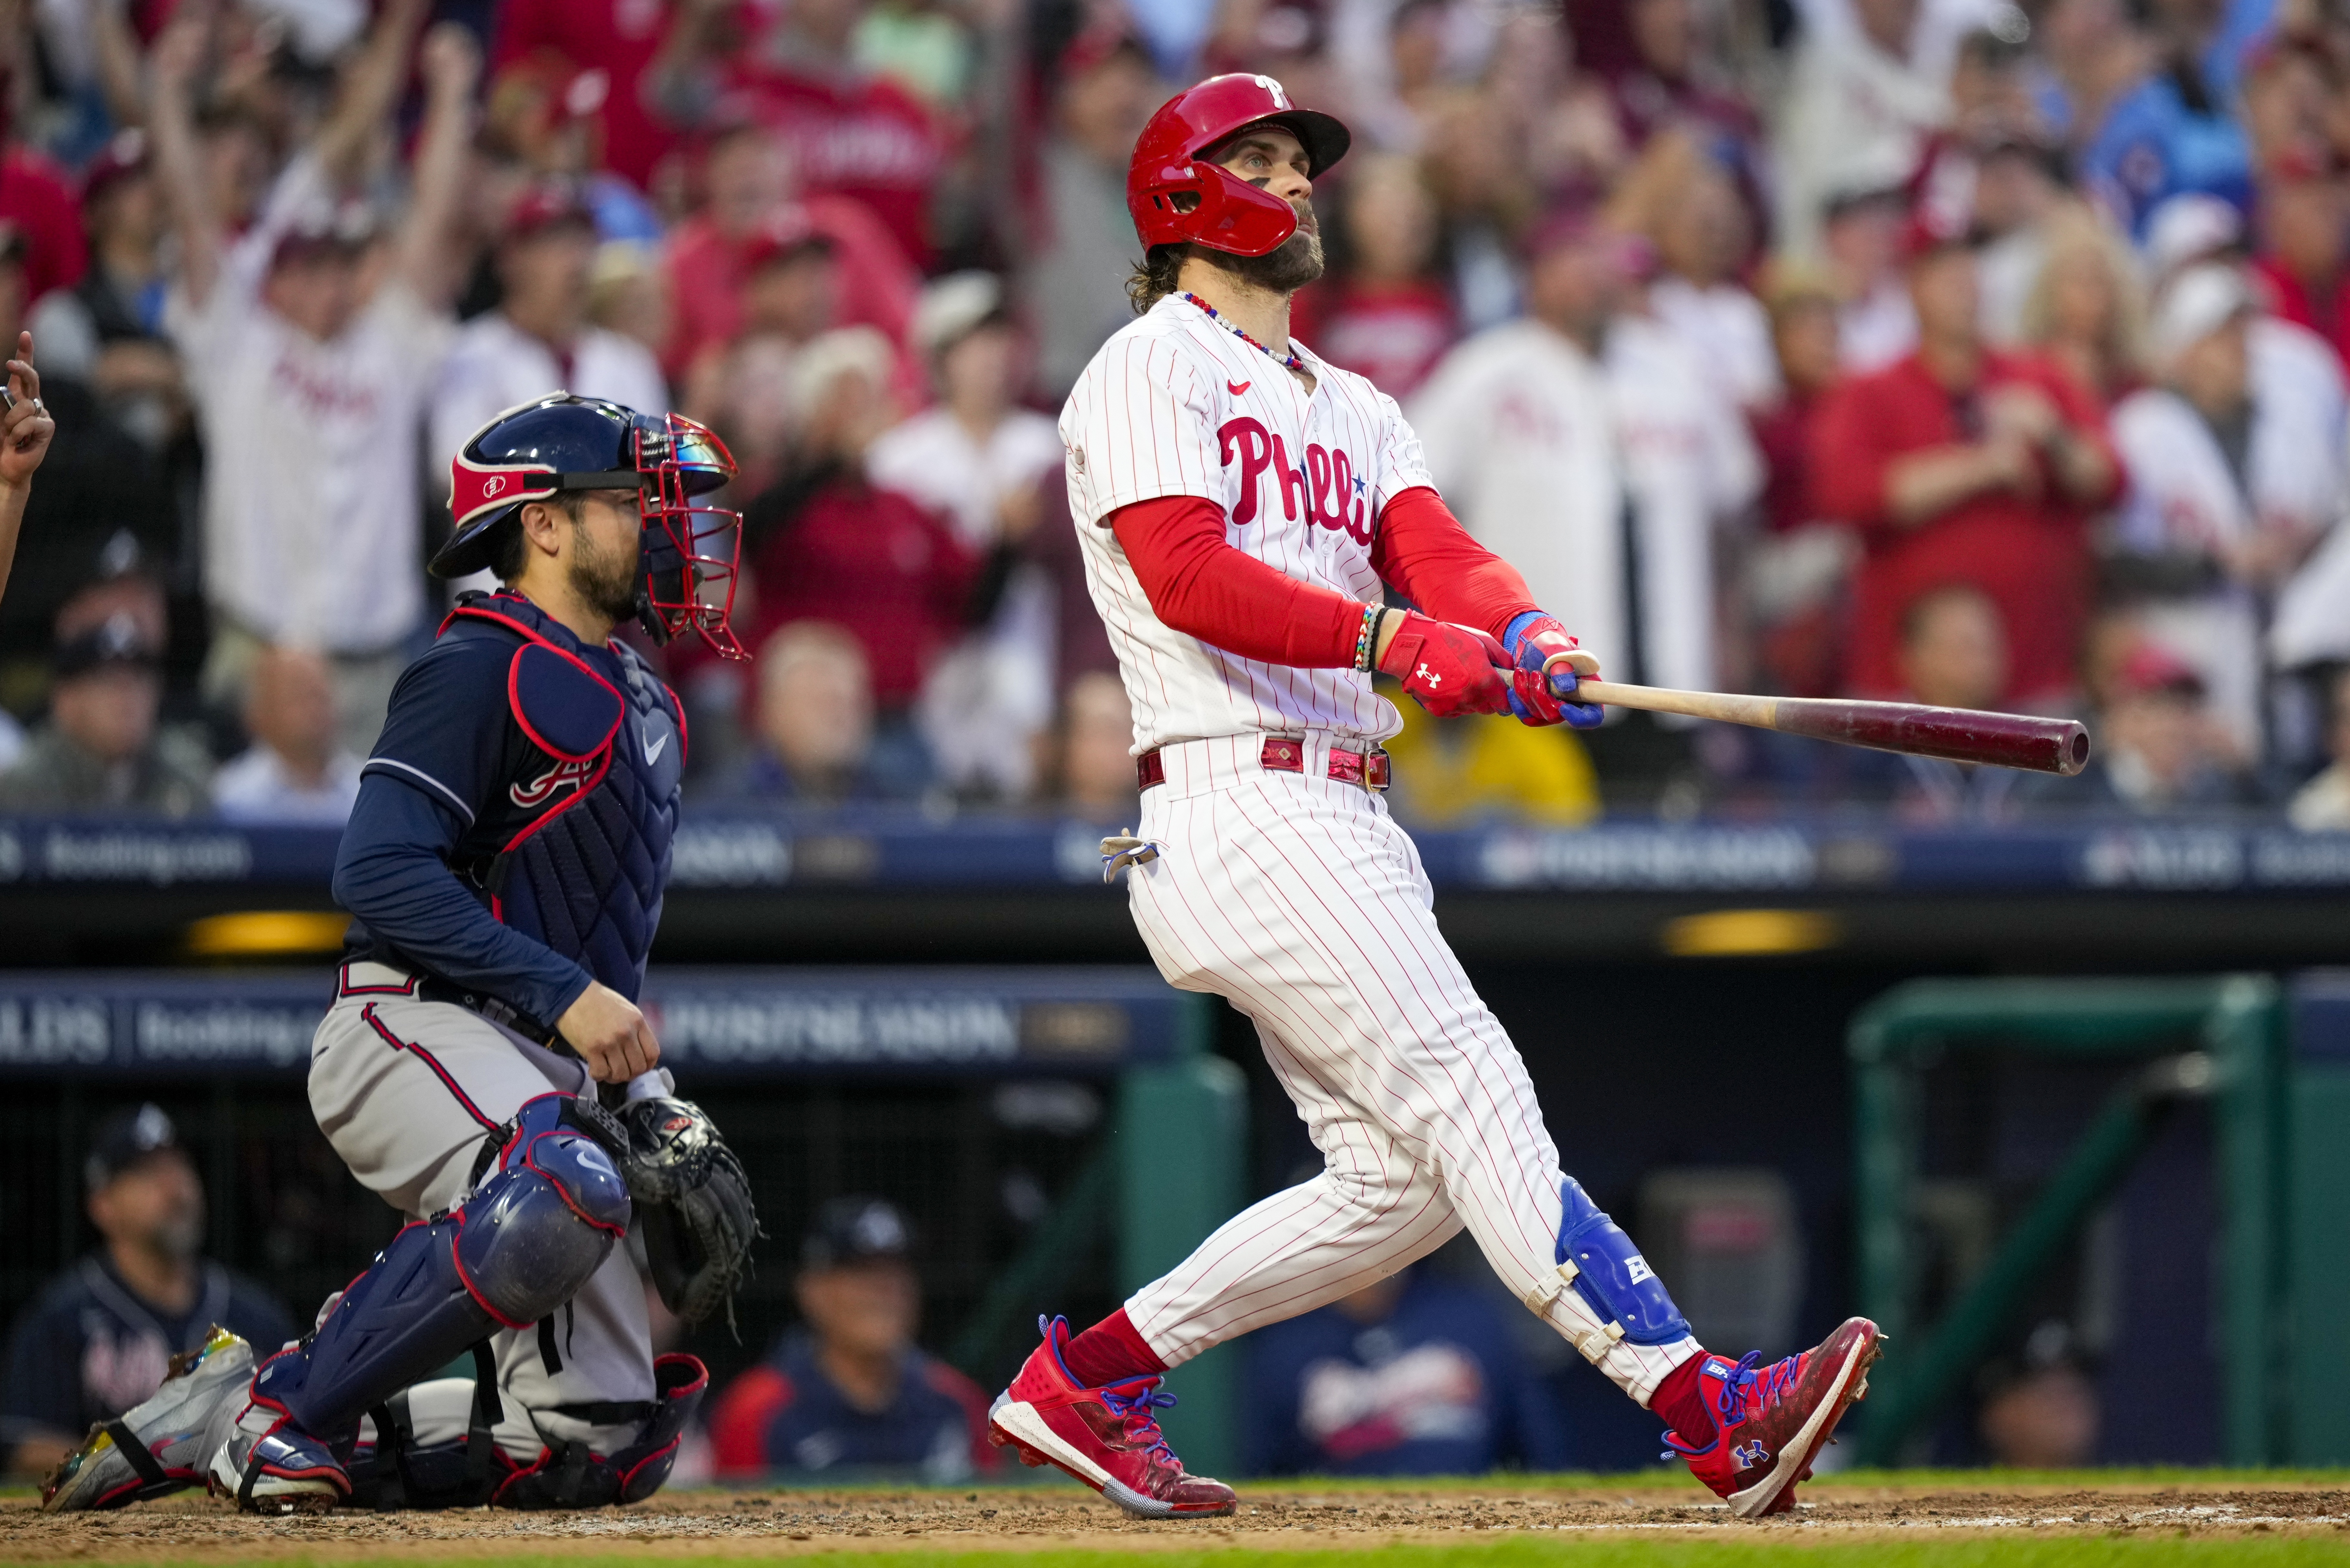 Phillies vs. Braves: MLB National League Division Series Game 1